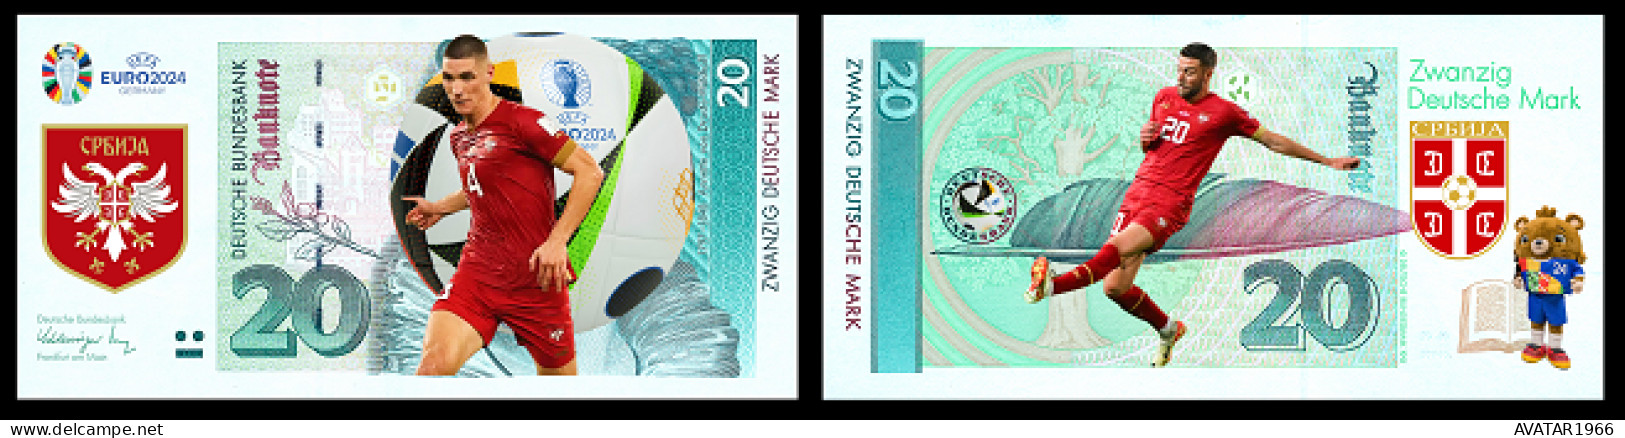 UEFA European Football Championship 2024 Qualified Country Serbia  8 Pieces Germany Fantasy Paper Money - [15] Commemoratives & Special Issues